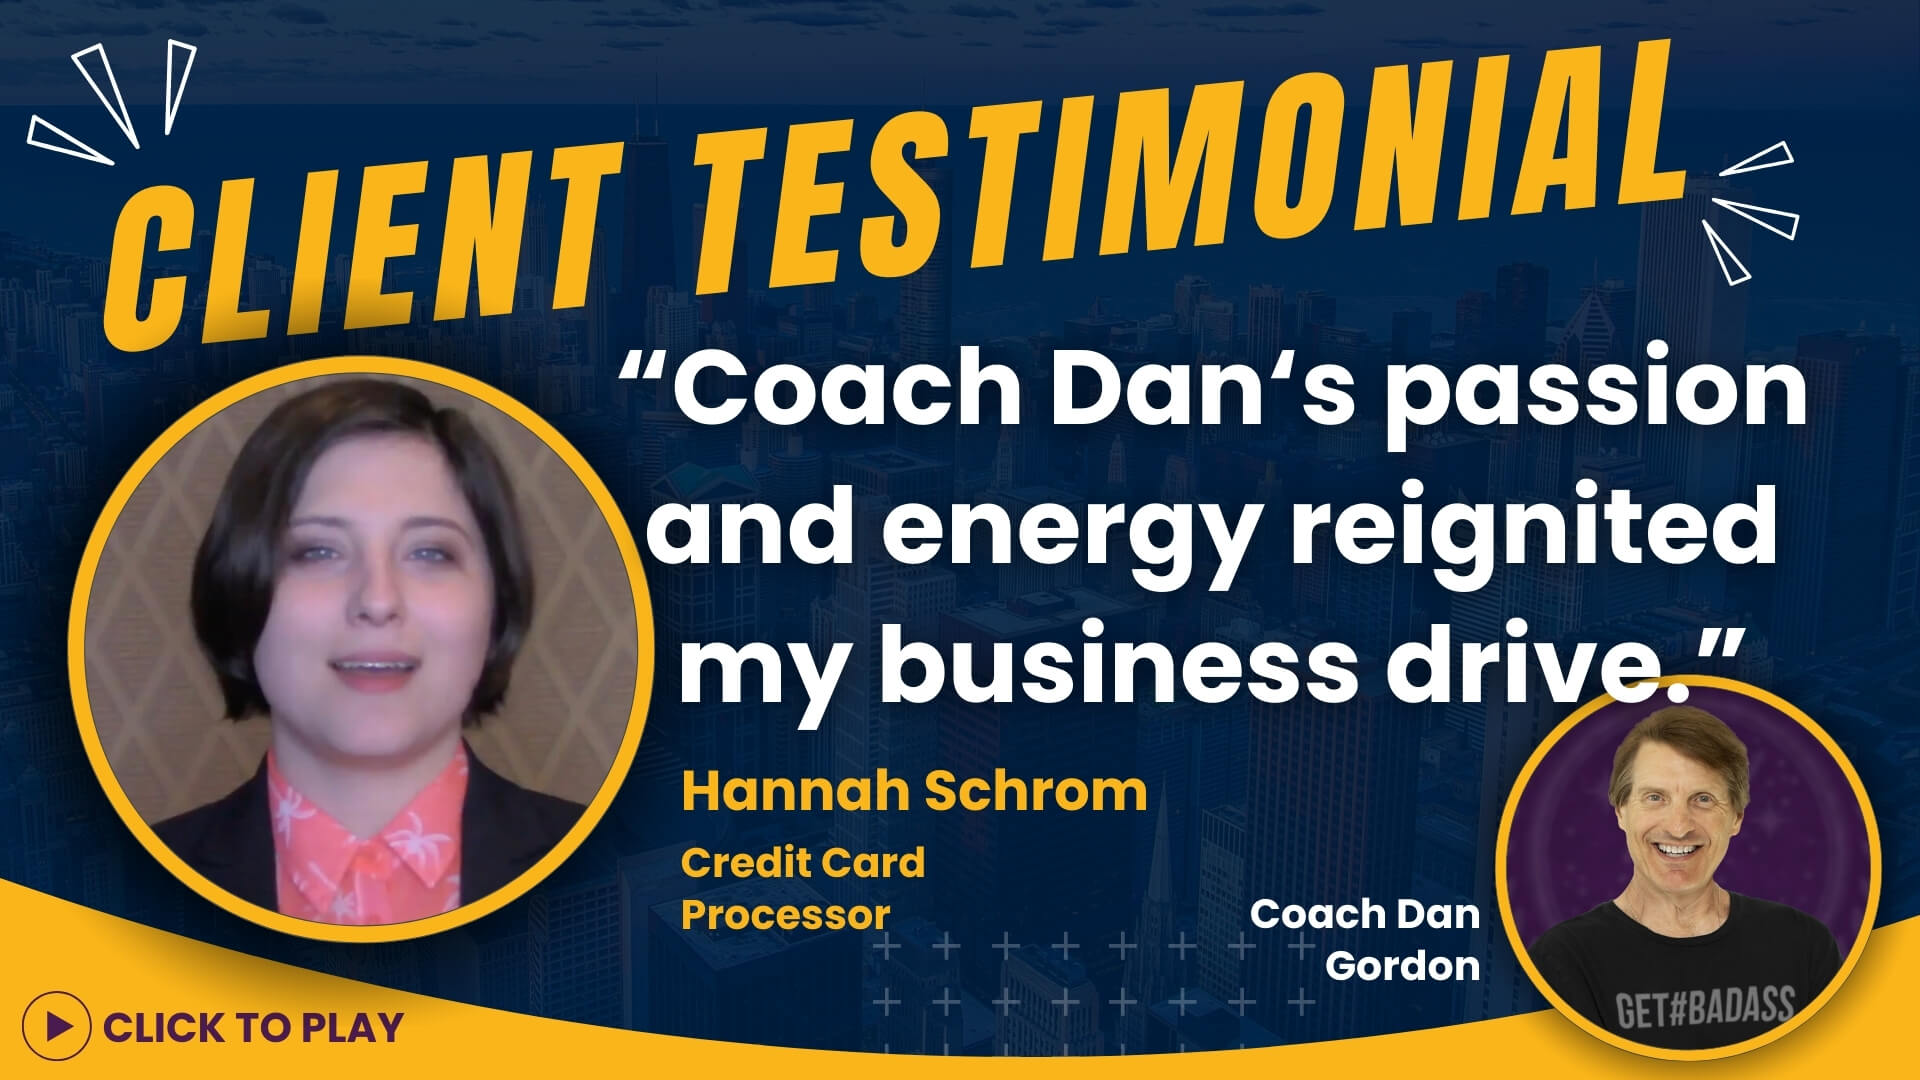 Hannah Schrom, wearing a business suit, giving a testimonial about Coach Dan Gordon against a city skyline backdrop, with text praising Coach Dan's impact on her business drive.